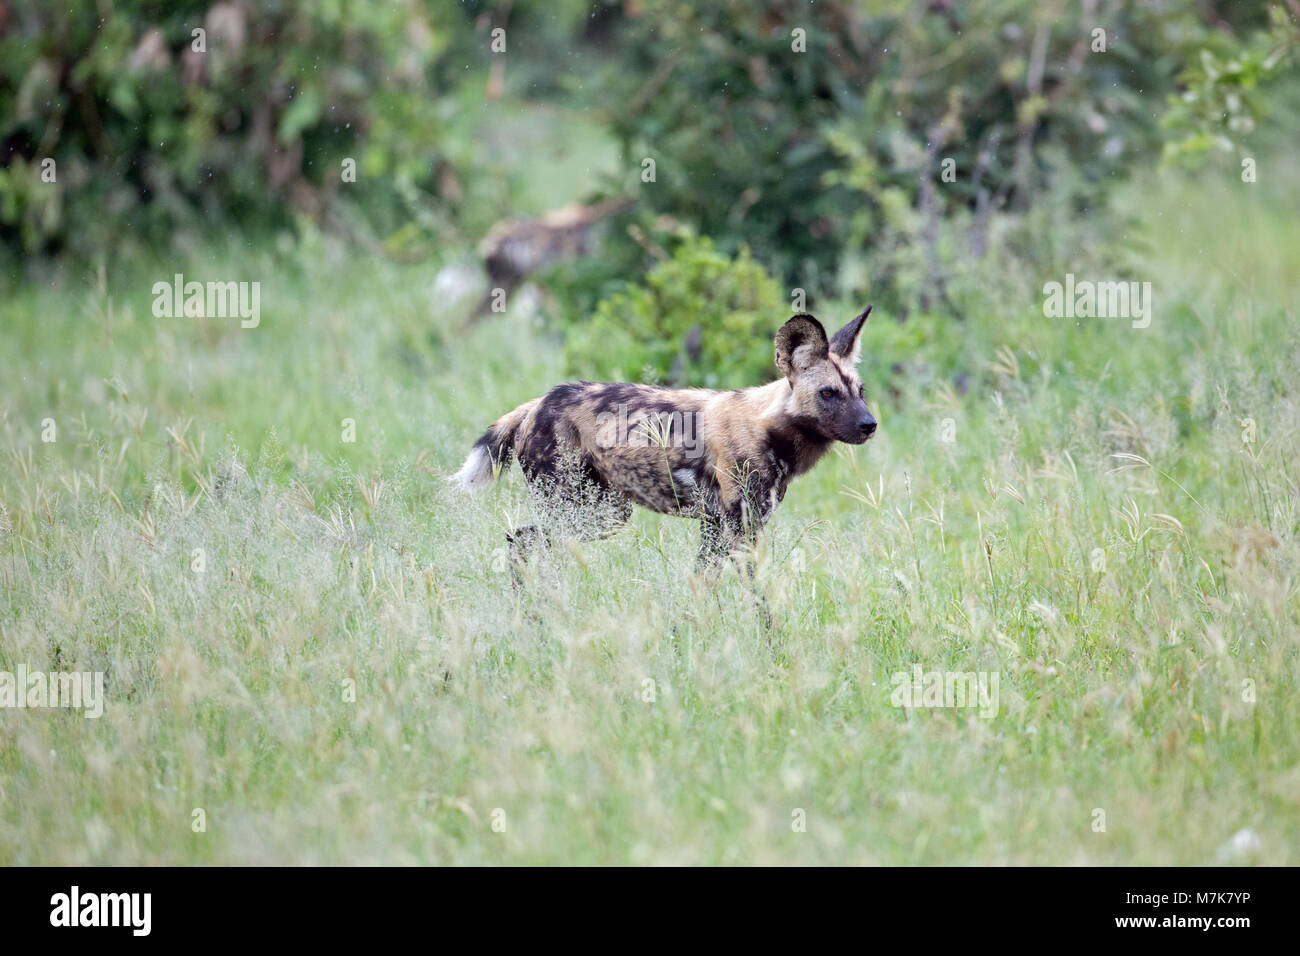 African Hunting Dog, African Wild Dog, or Painted Dog or Painted Wolf, (Lycaon pictus). A pack member positioning itself around bush cover, ready to m Stock Photo